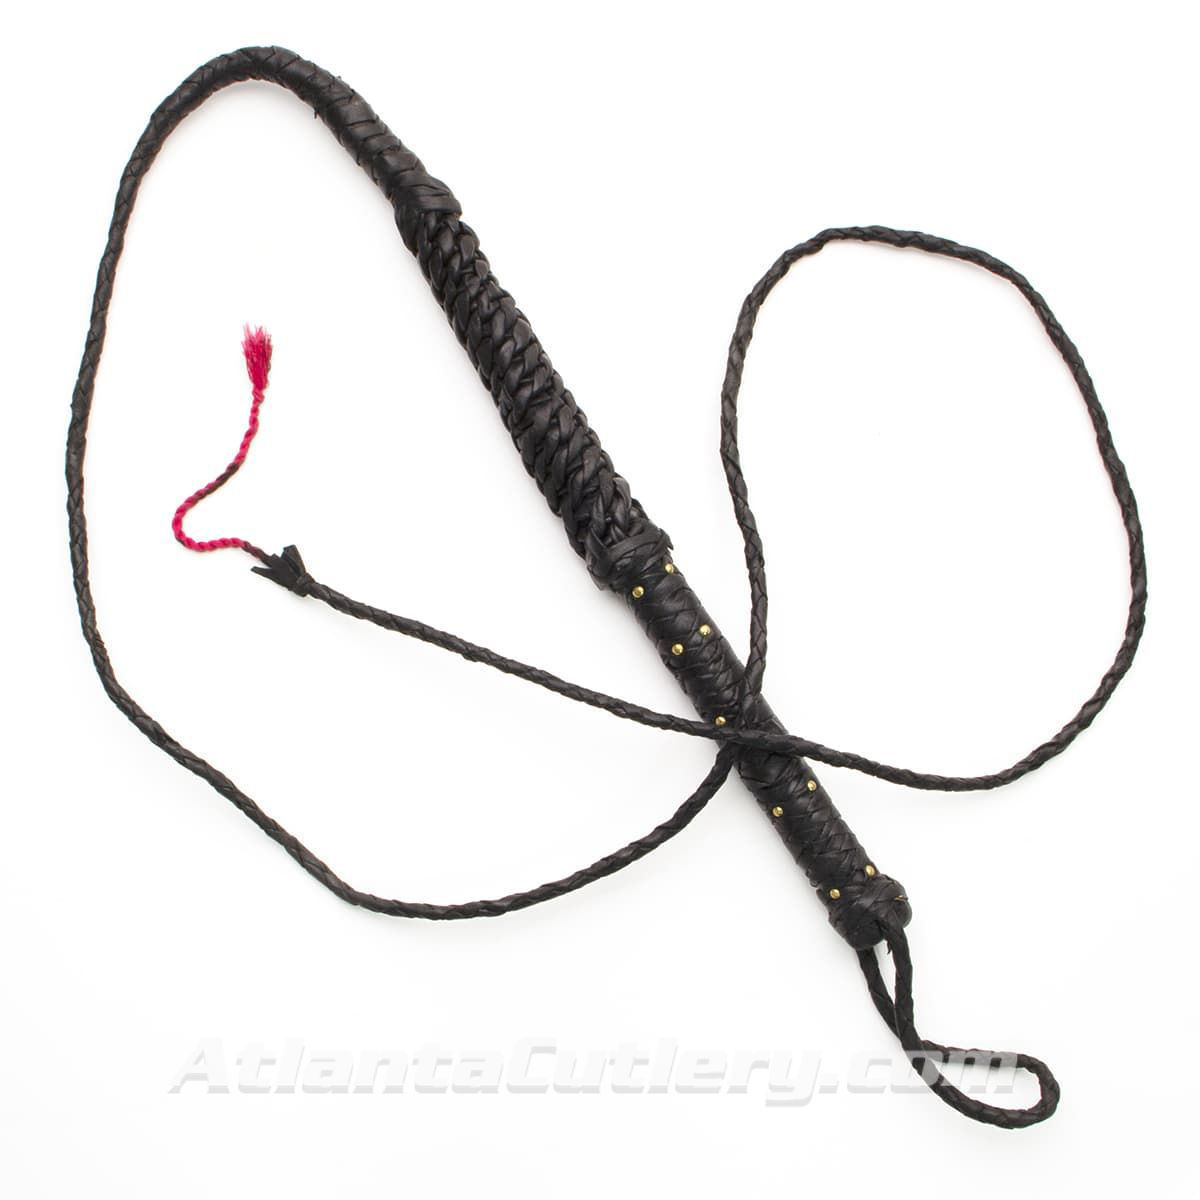 8 foot long leather bull whip at budget price is sturdy, has braided construction and a brass studded grip